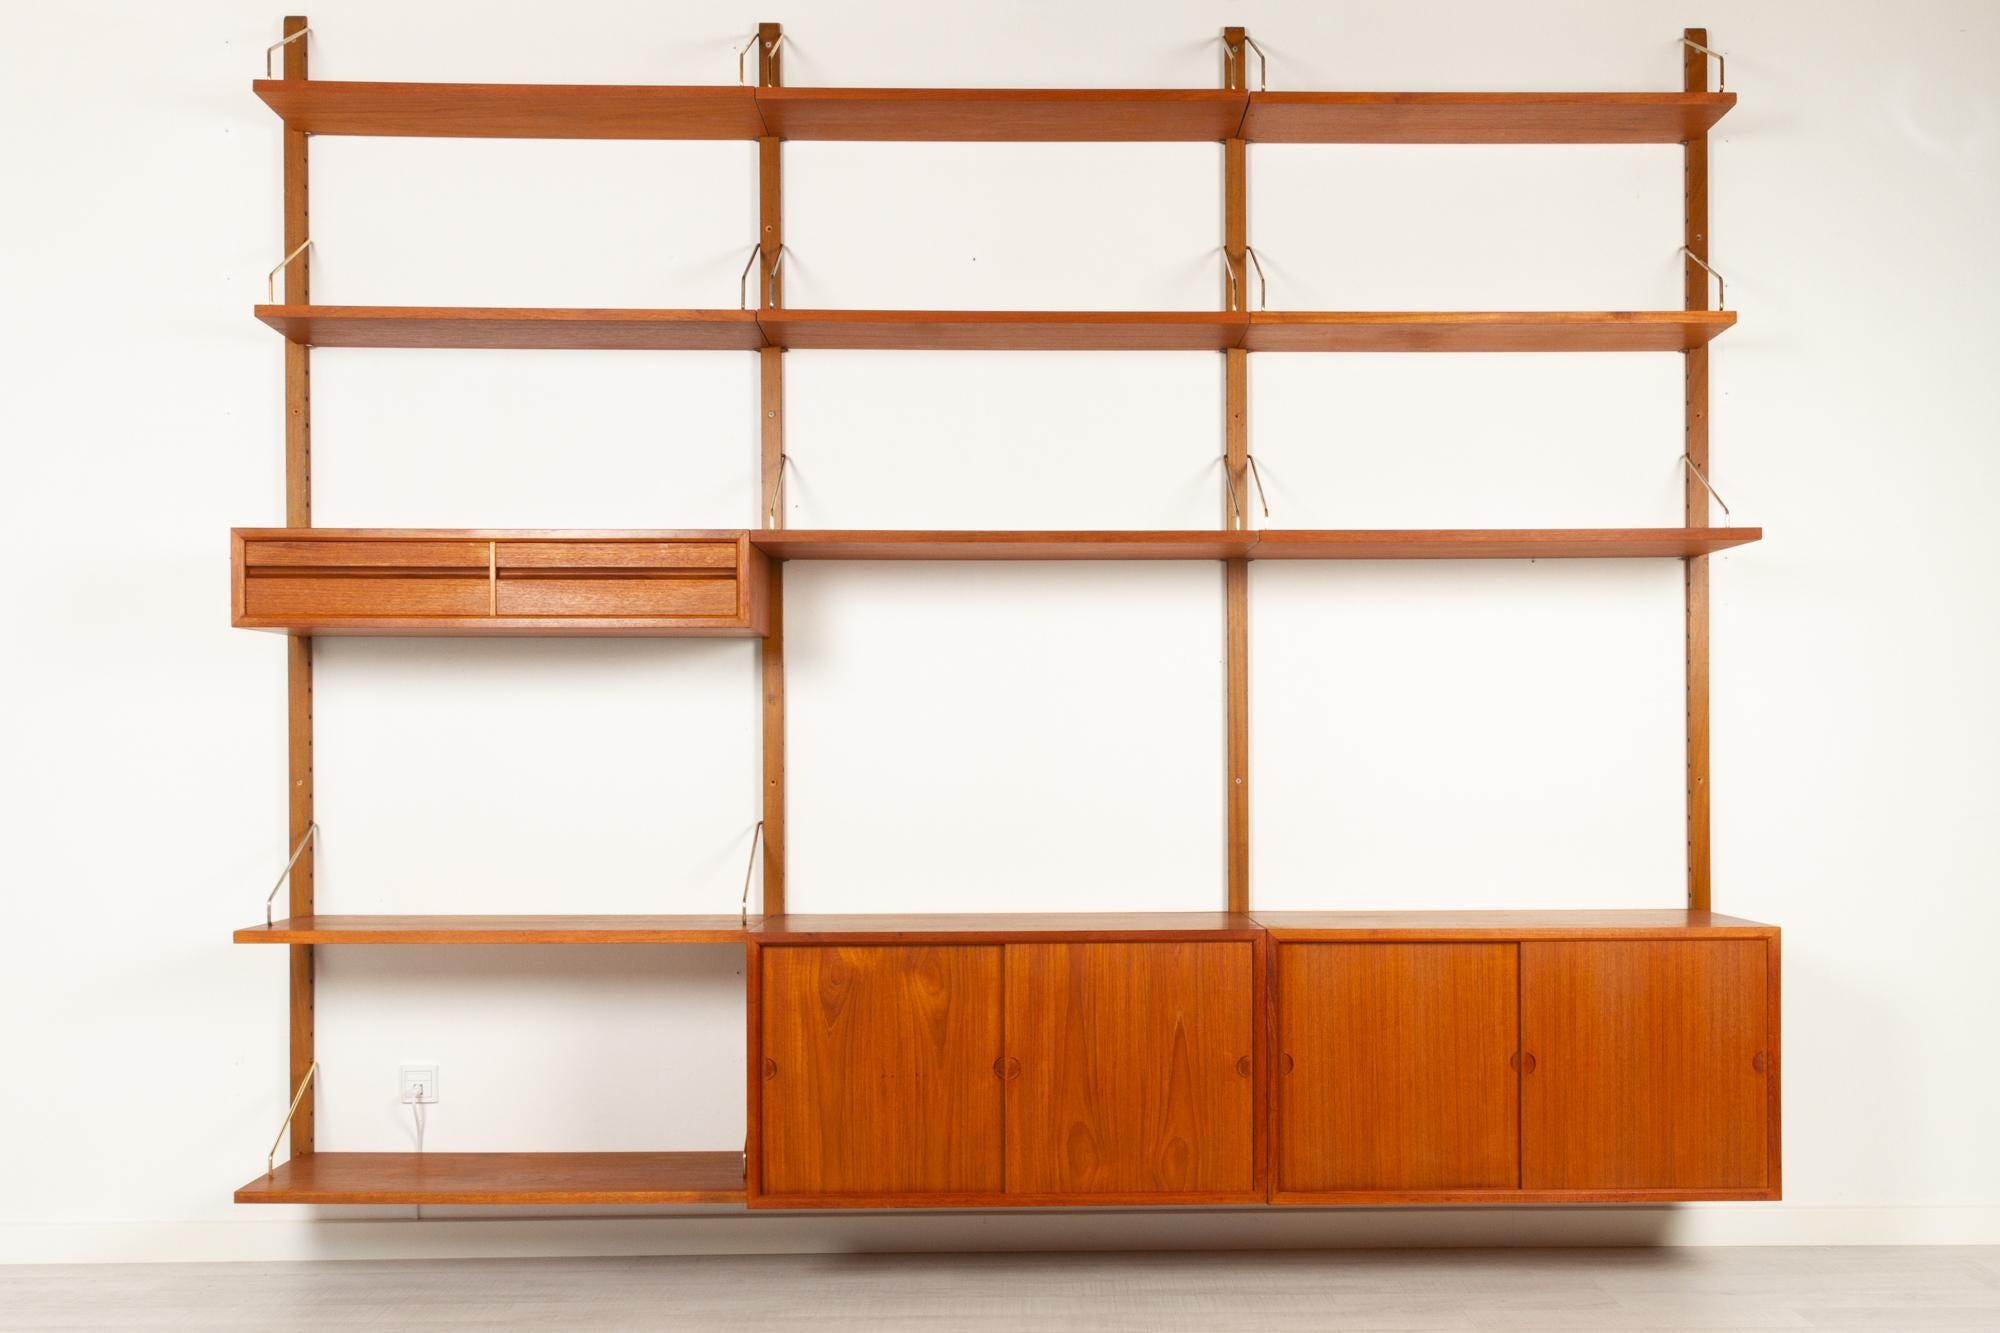 Vintage Danish teak wall unit by Poul Cadovius for Cado, 1960s.
Mid-Century Modern 3 bay shelving system model Royal. This is a original vintage shelving system designed in 1948 by Danish architect Poul Cadovius. 
Cadovius had the revolutionary